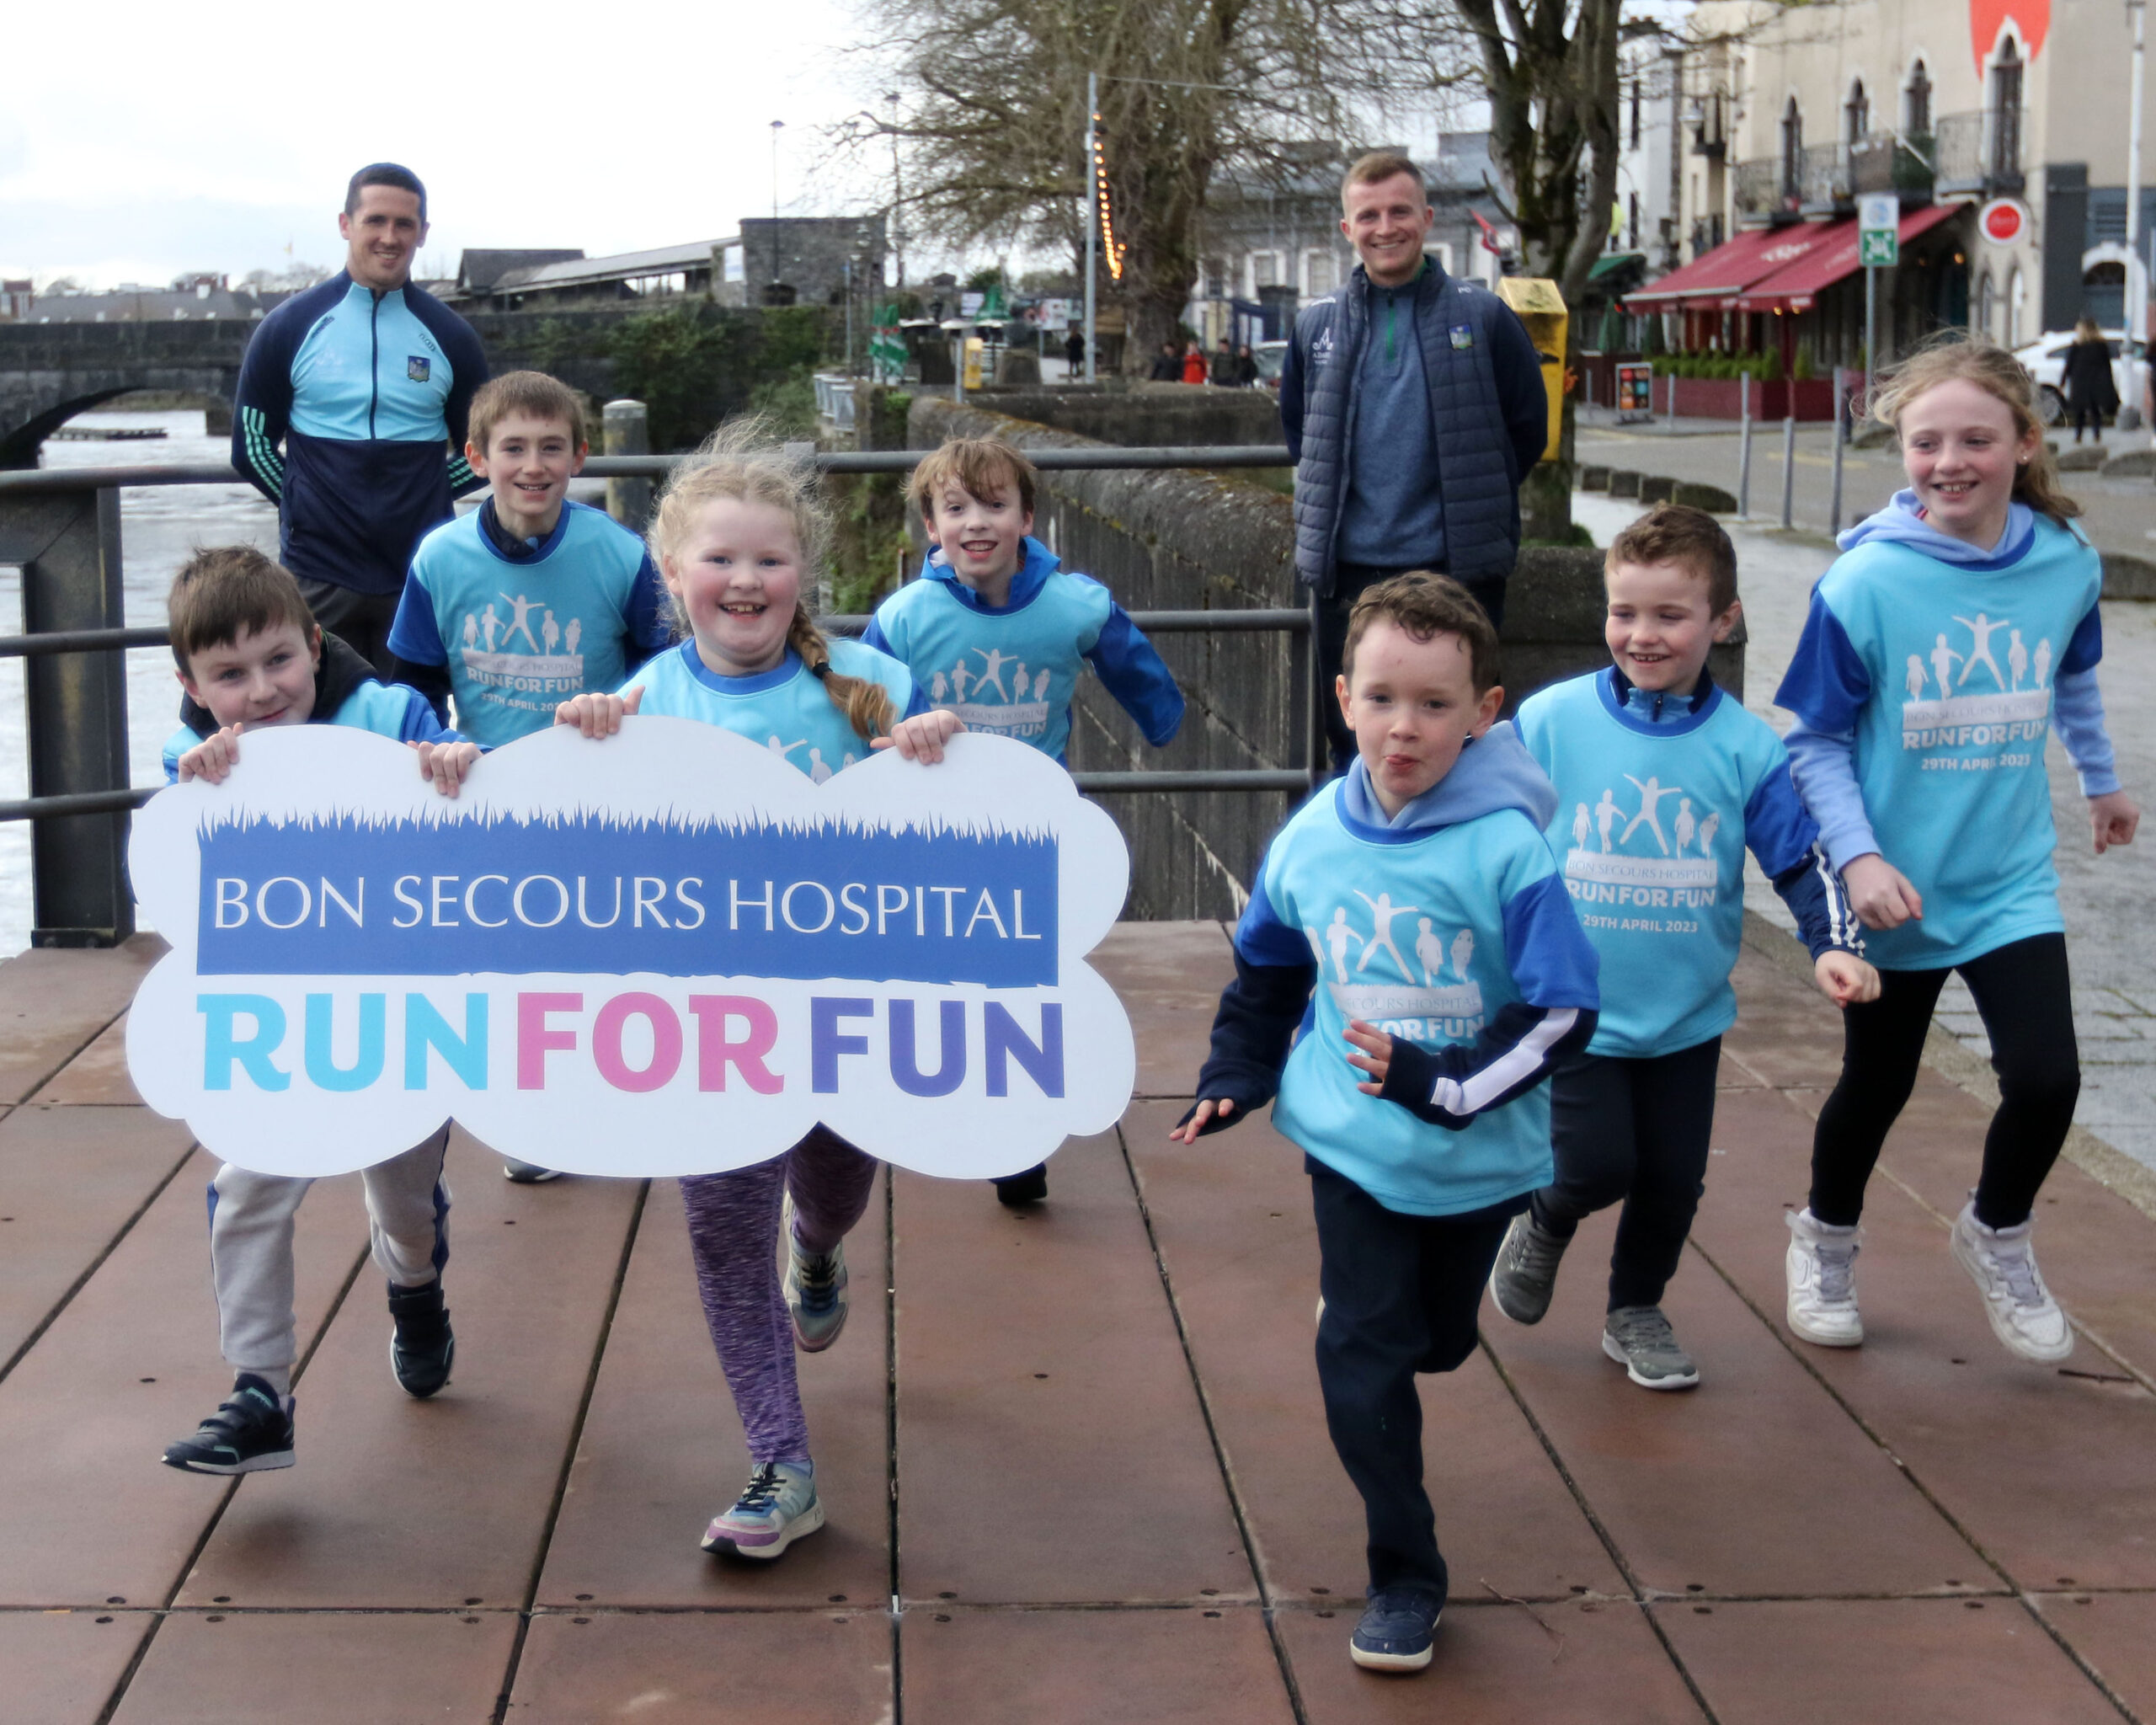 ILIM 31-3-23 Bon Secours Hospital Run for Fun Dylan Barry, Scott Brougham, Cillian Wallace, Ella Barry, Stella Lee, Patrick Moran and Jamie Devereaux with Peter Casey and Darrgh O'Donovan, Limerick's All Ireland Winning Hurlers supporting the Bon Secours Hospital Run for Fun 2023 Picture Brendan Gleeson